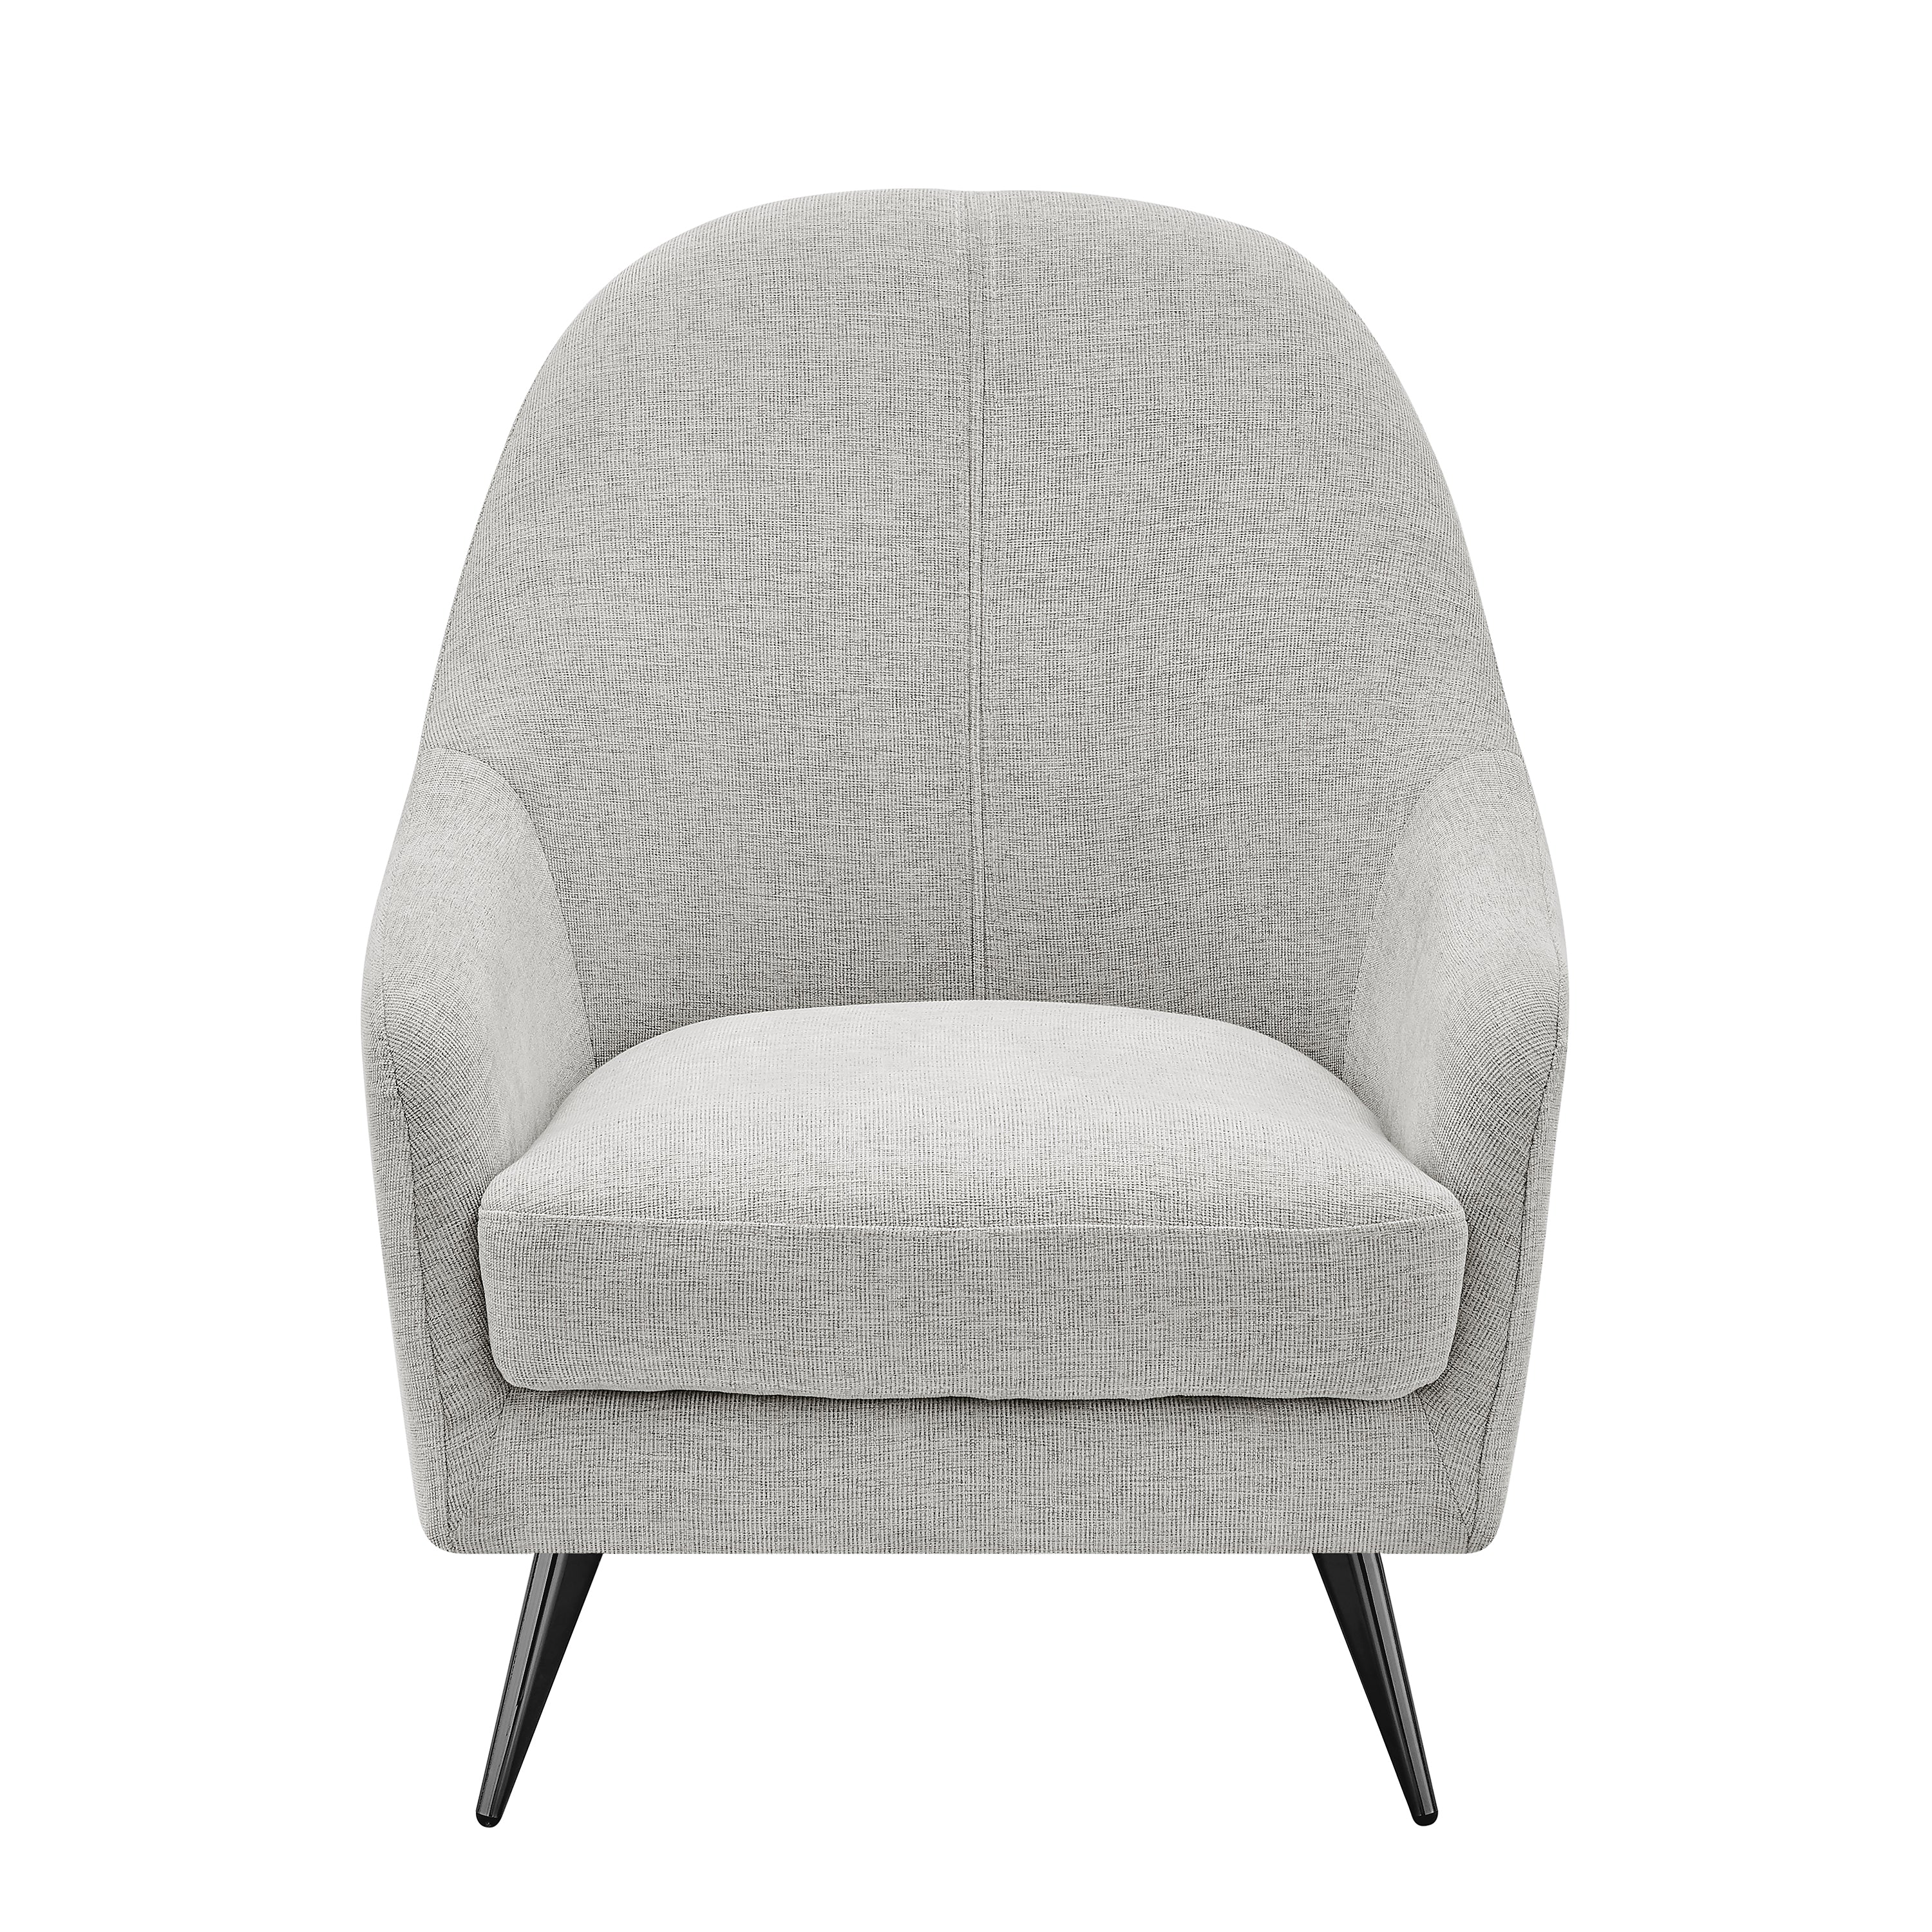 Euro Style Accent Chairs - Selene Lounge Chair in Taupe Fabric with Black Chrome Steel Legs